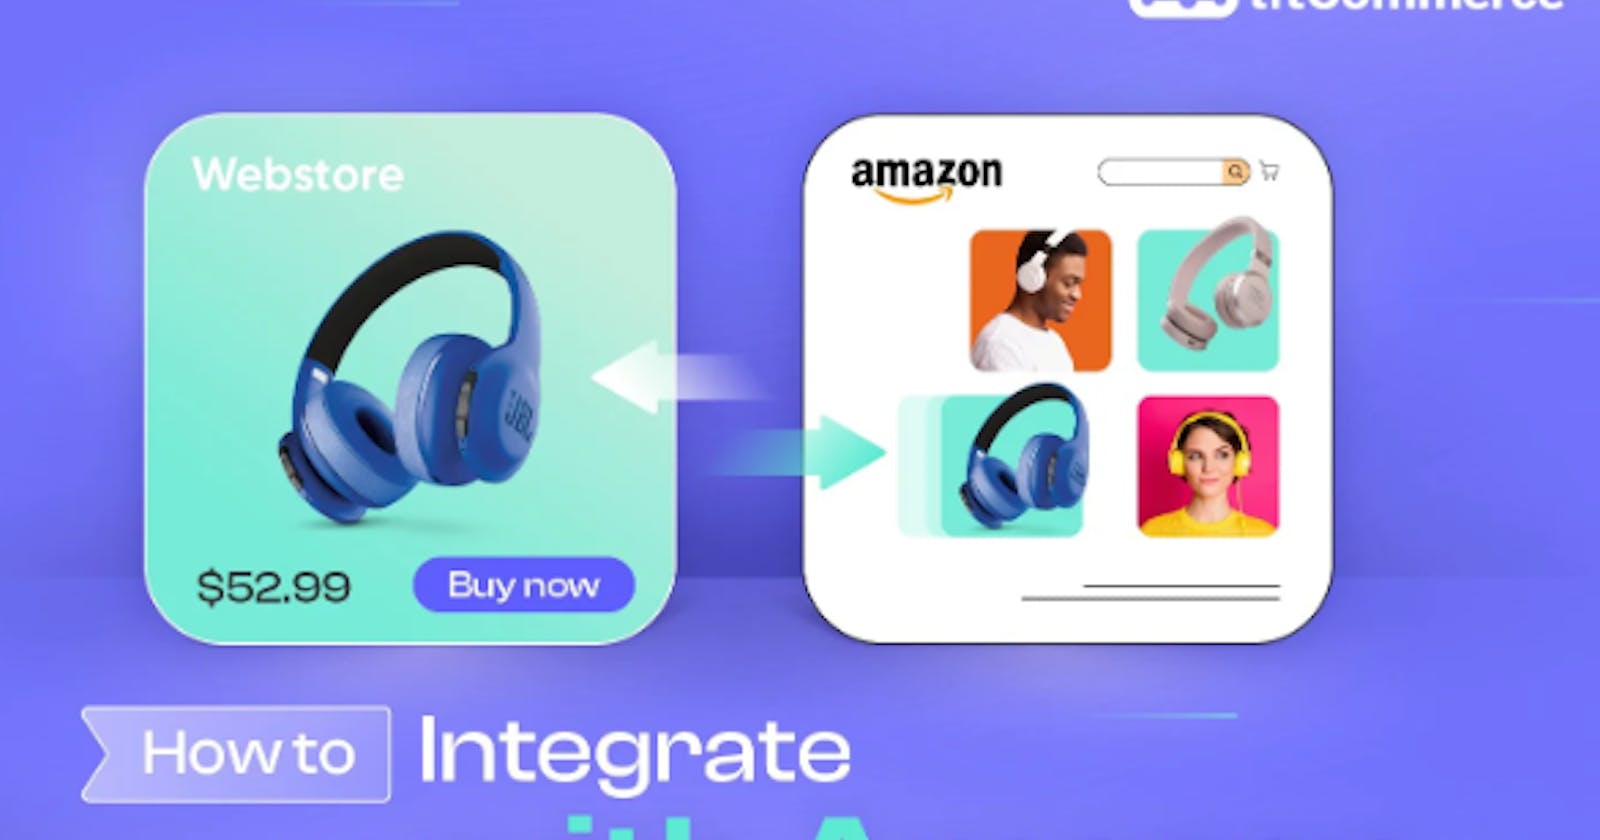 How to Integrate with Amazon using LitCommerce